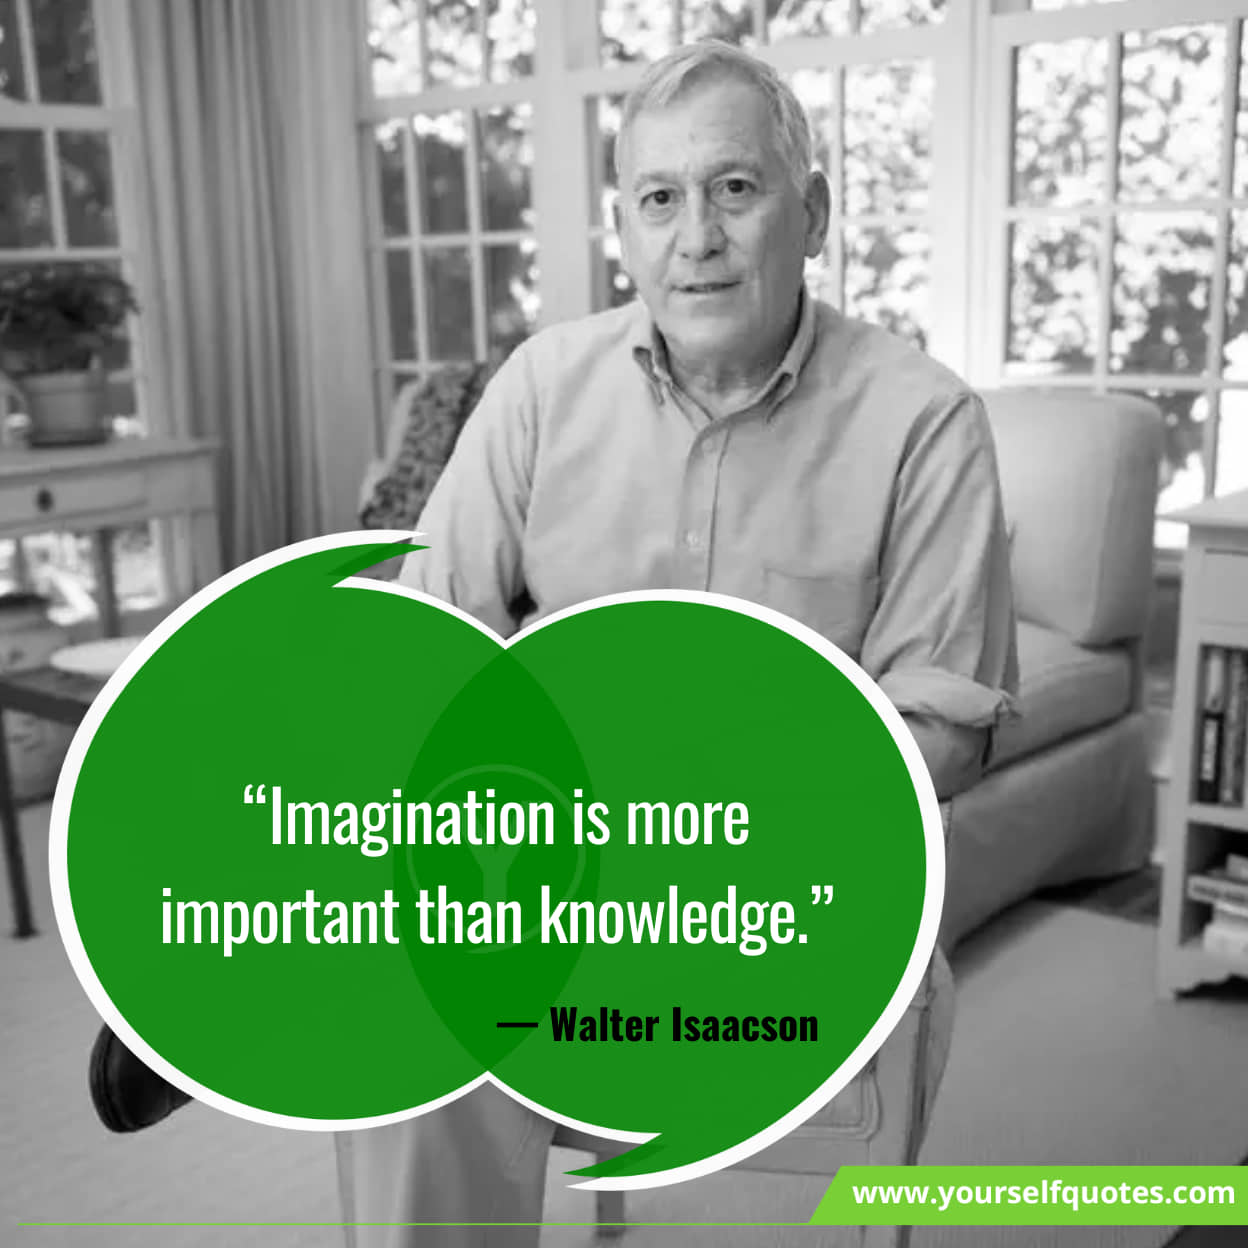 Inspirational Walter Isaacson Quotes Thoughts